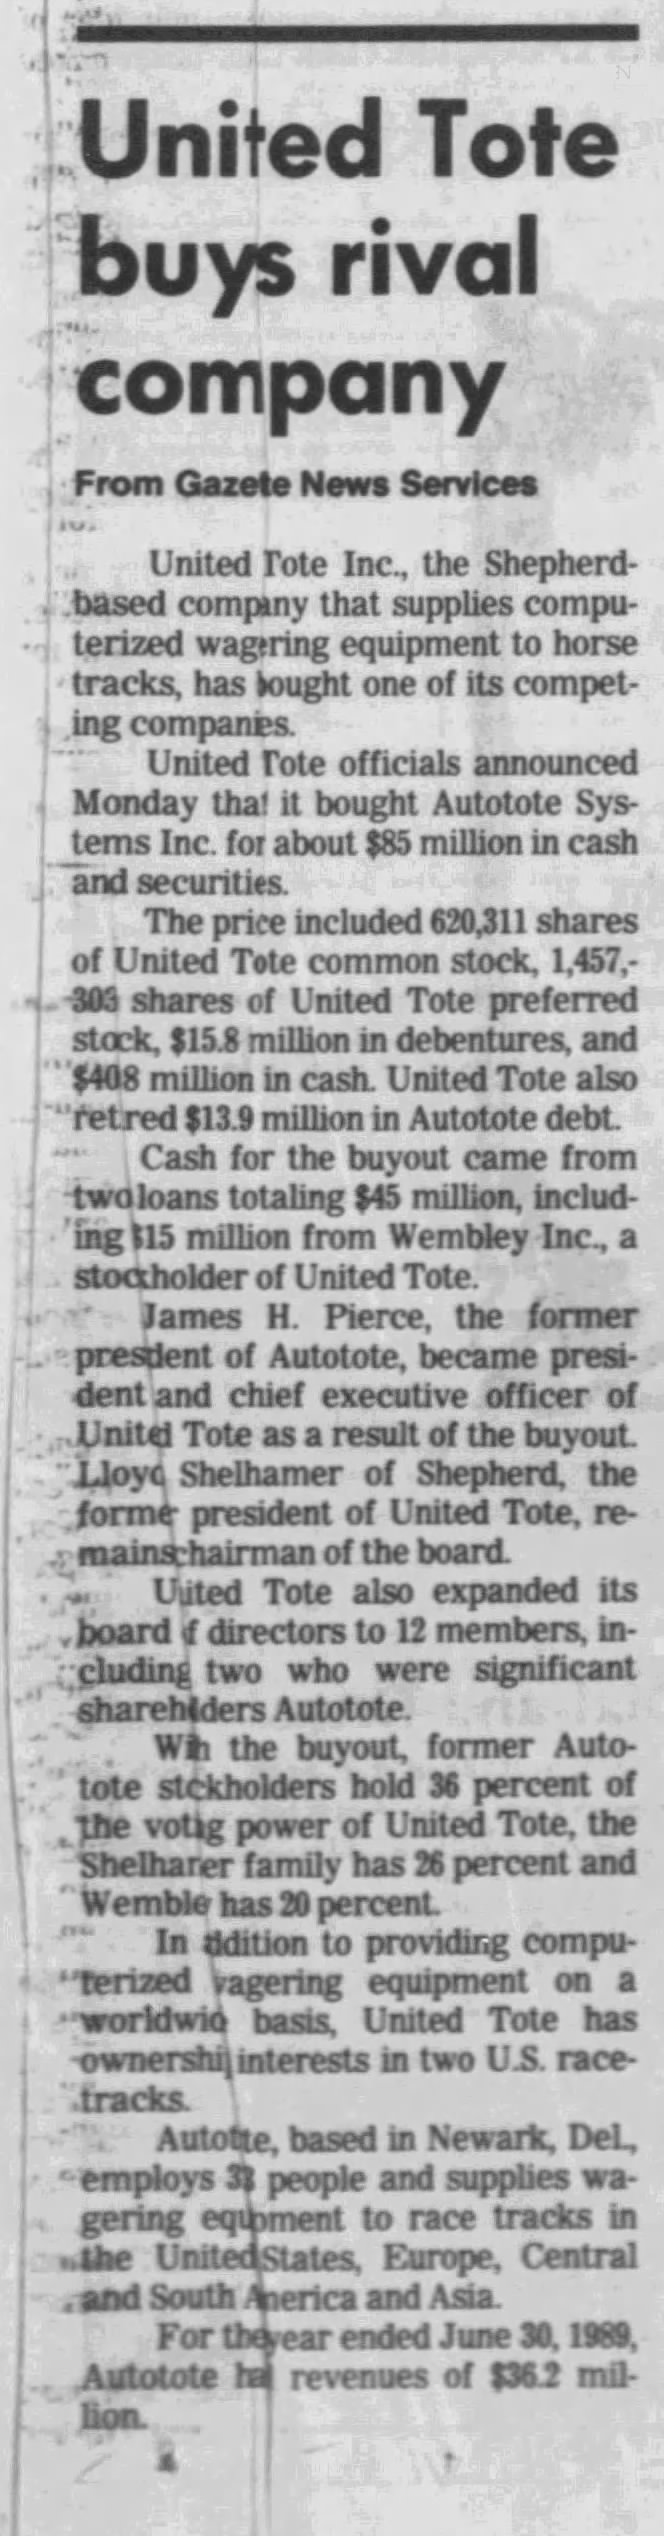 United Tote buys rival company